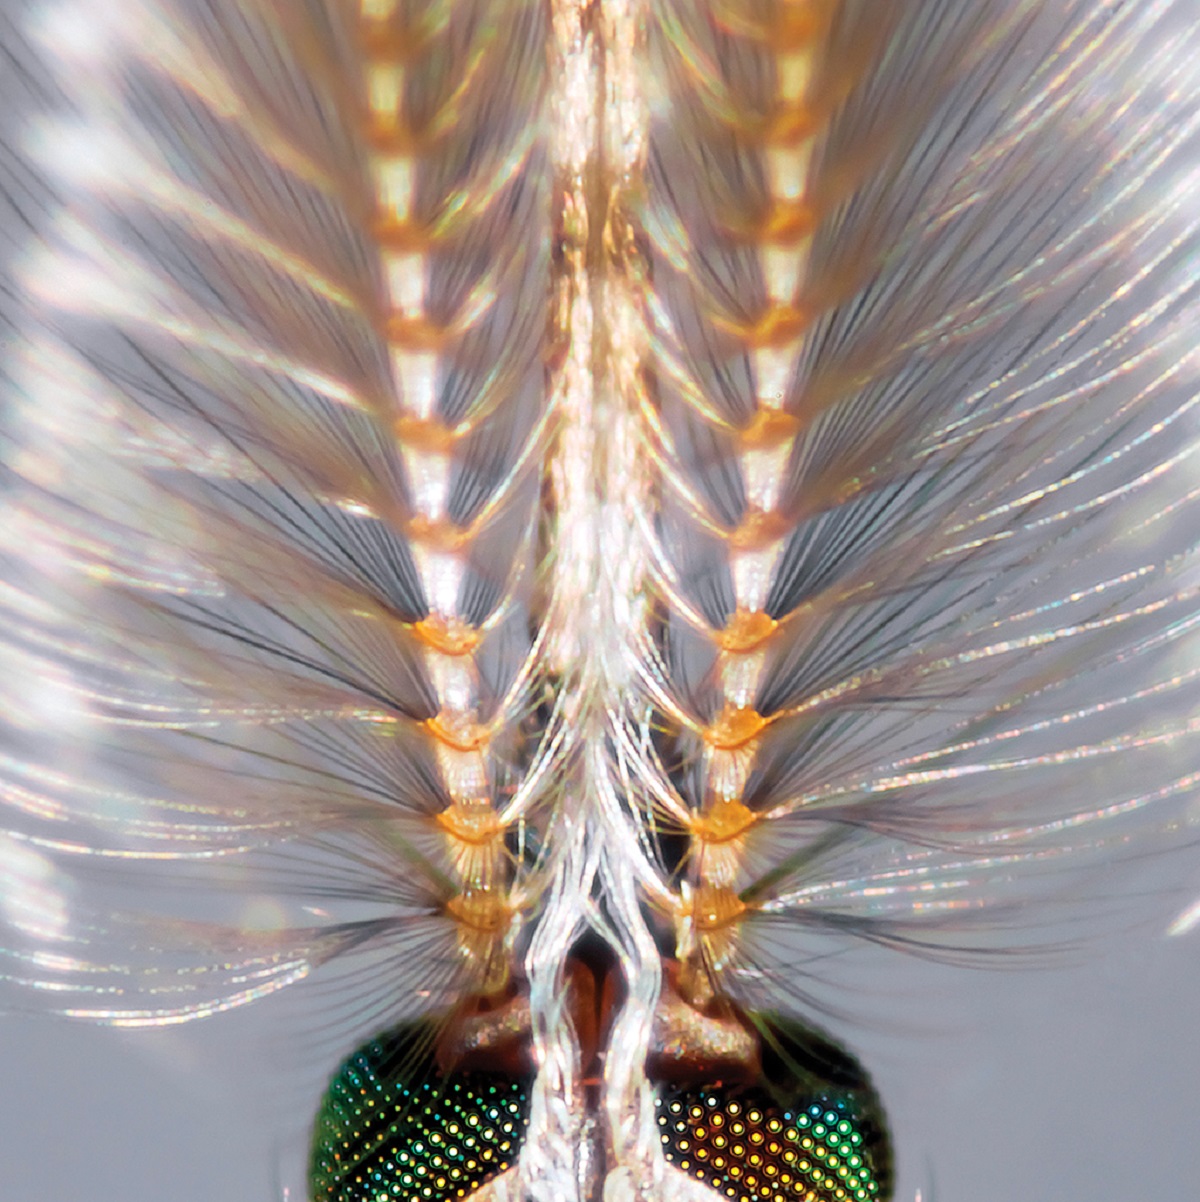 The antennae fibrillae of a male Anopheles mosquito, used to detect airborne sound | Photo: © Gareth Jones